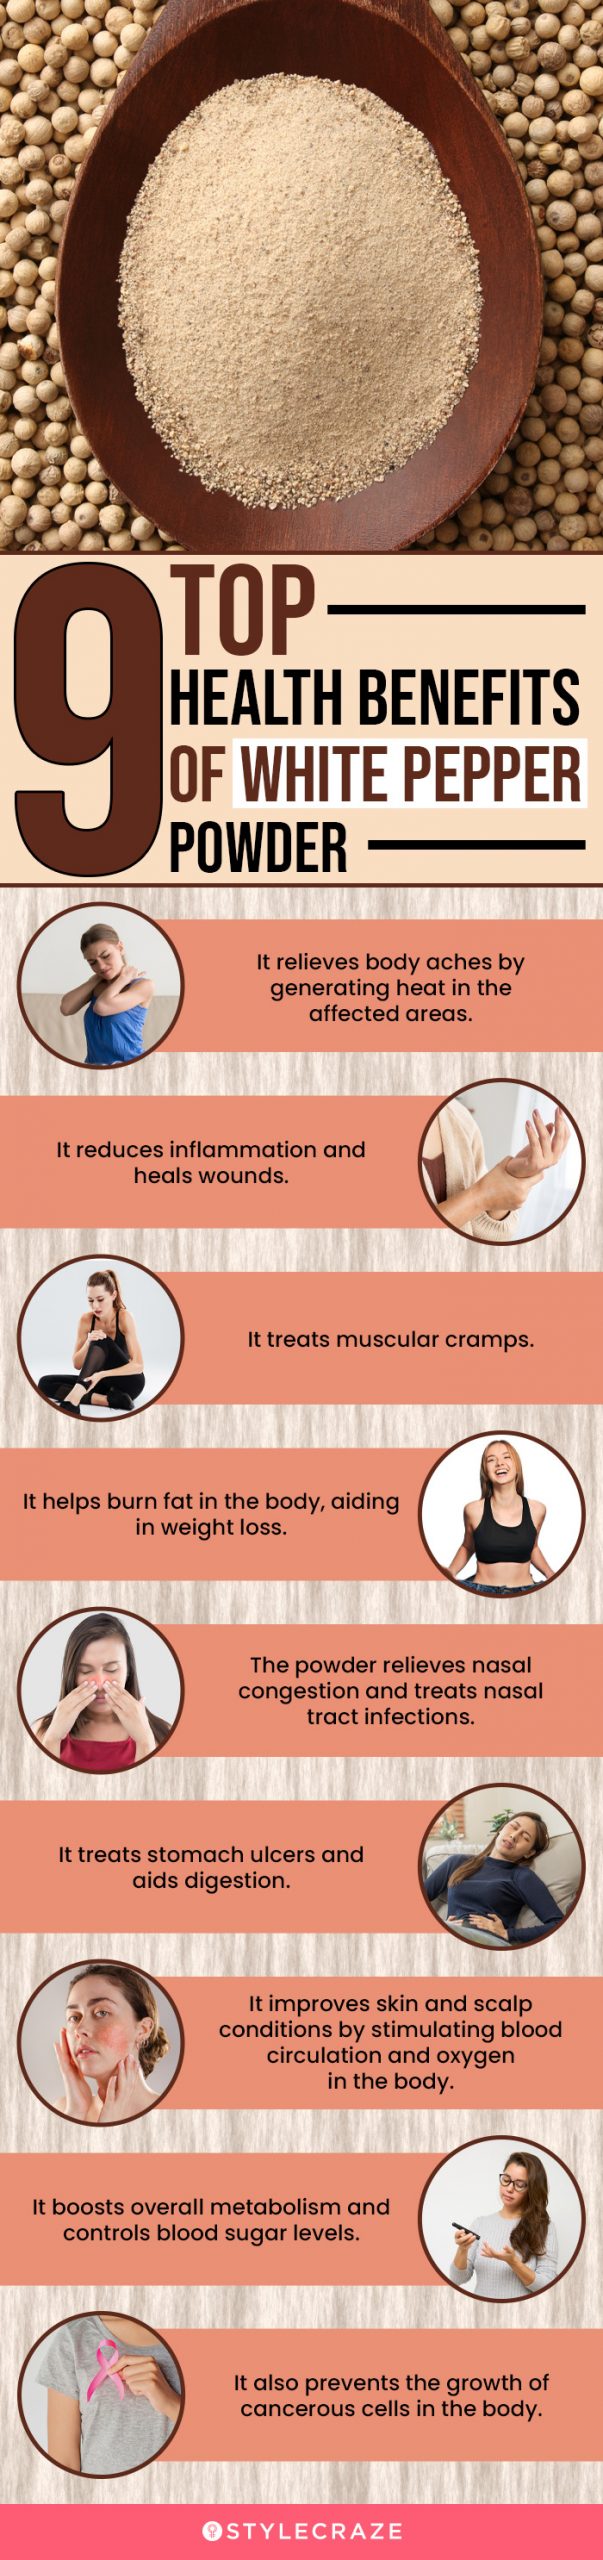 9 top health benefits of white pepper powder (infographic)